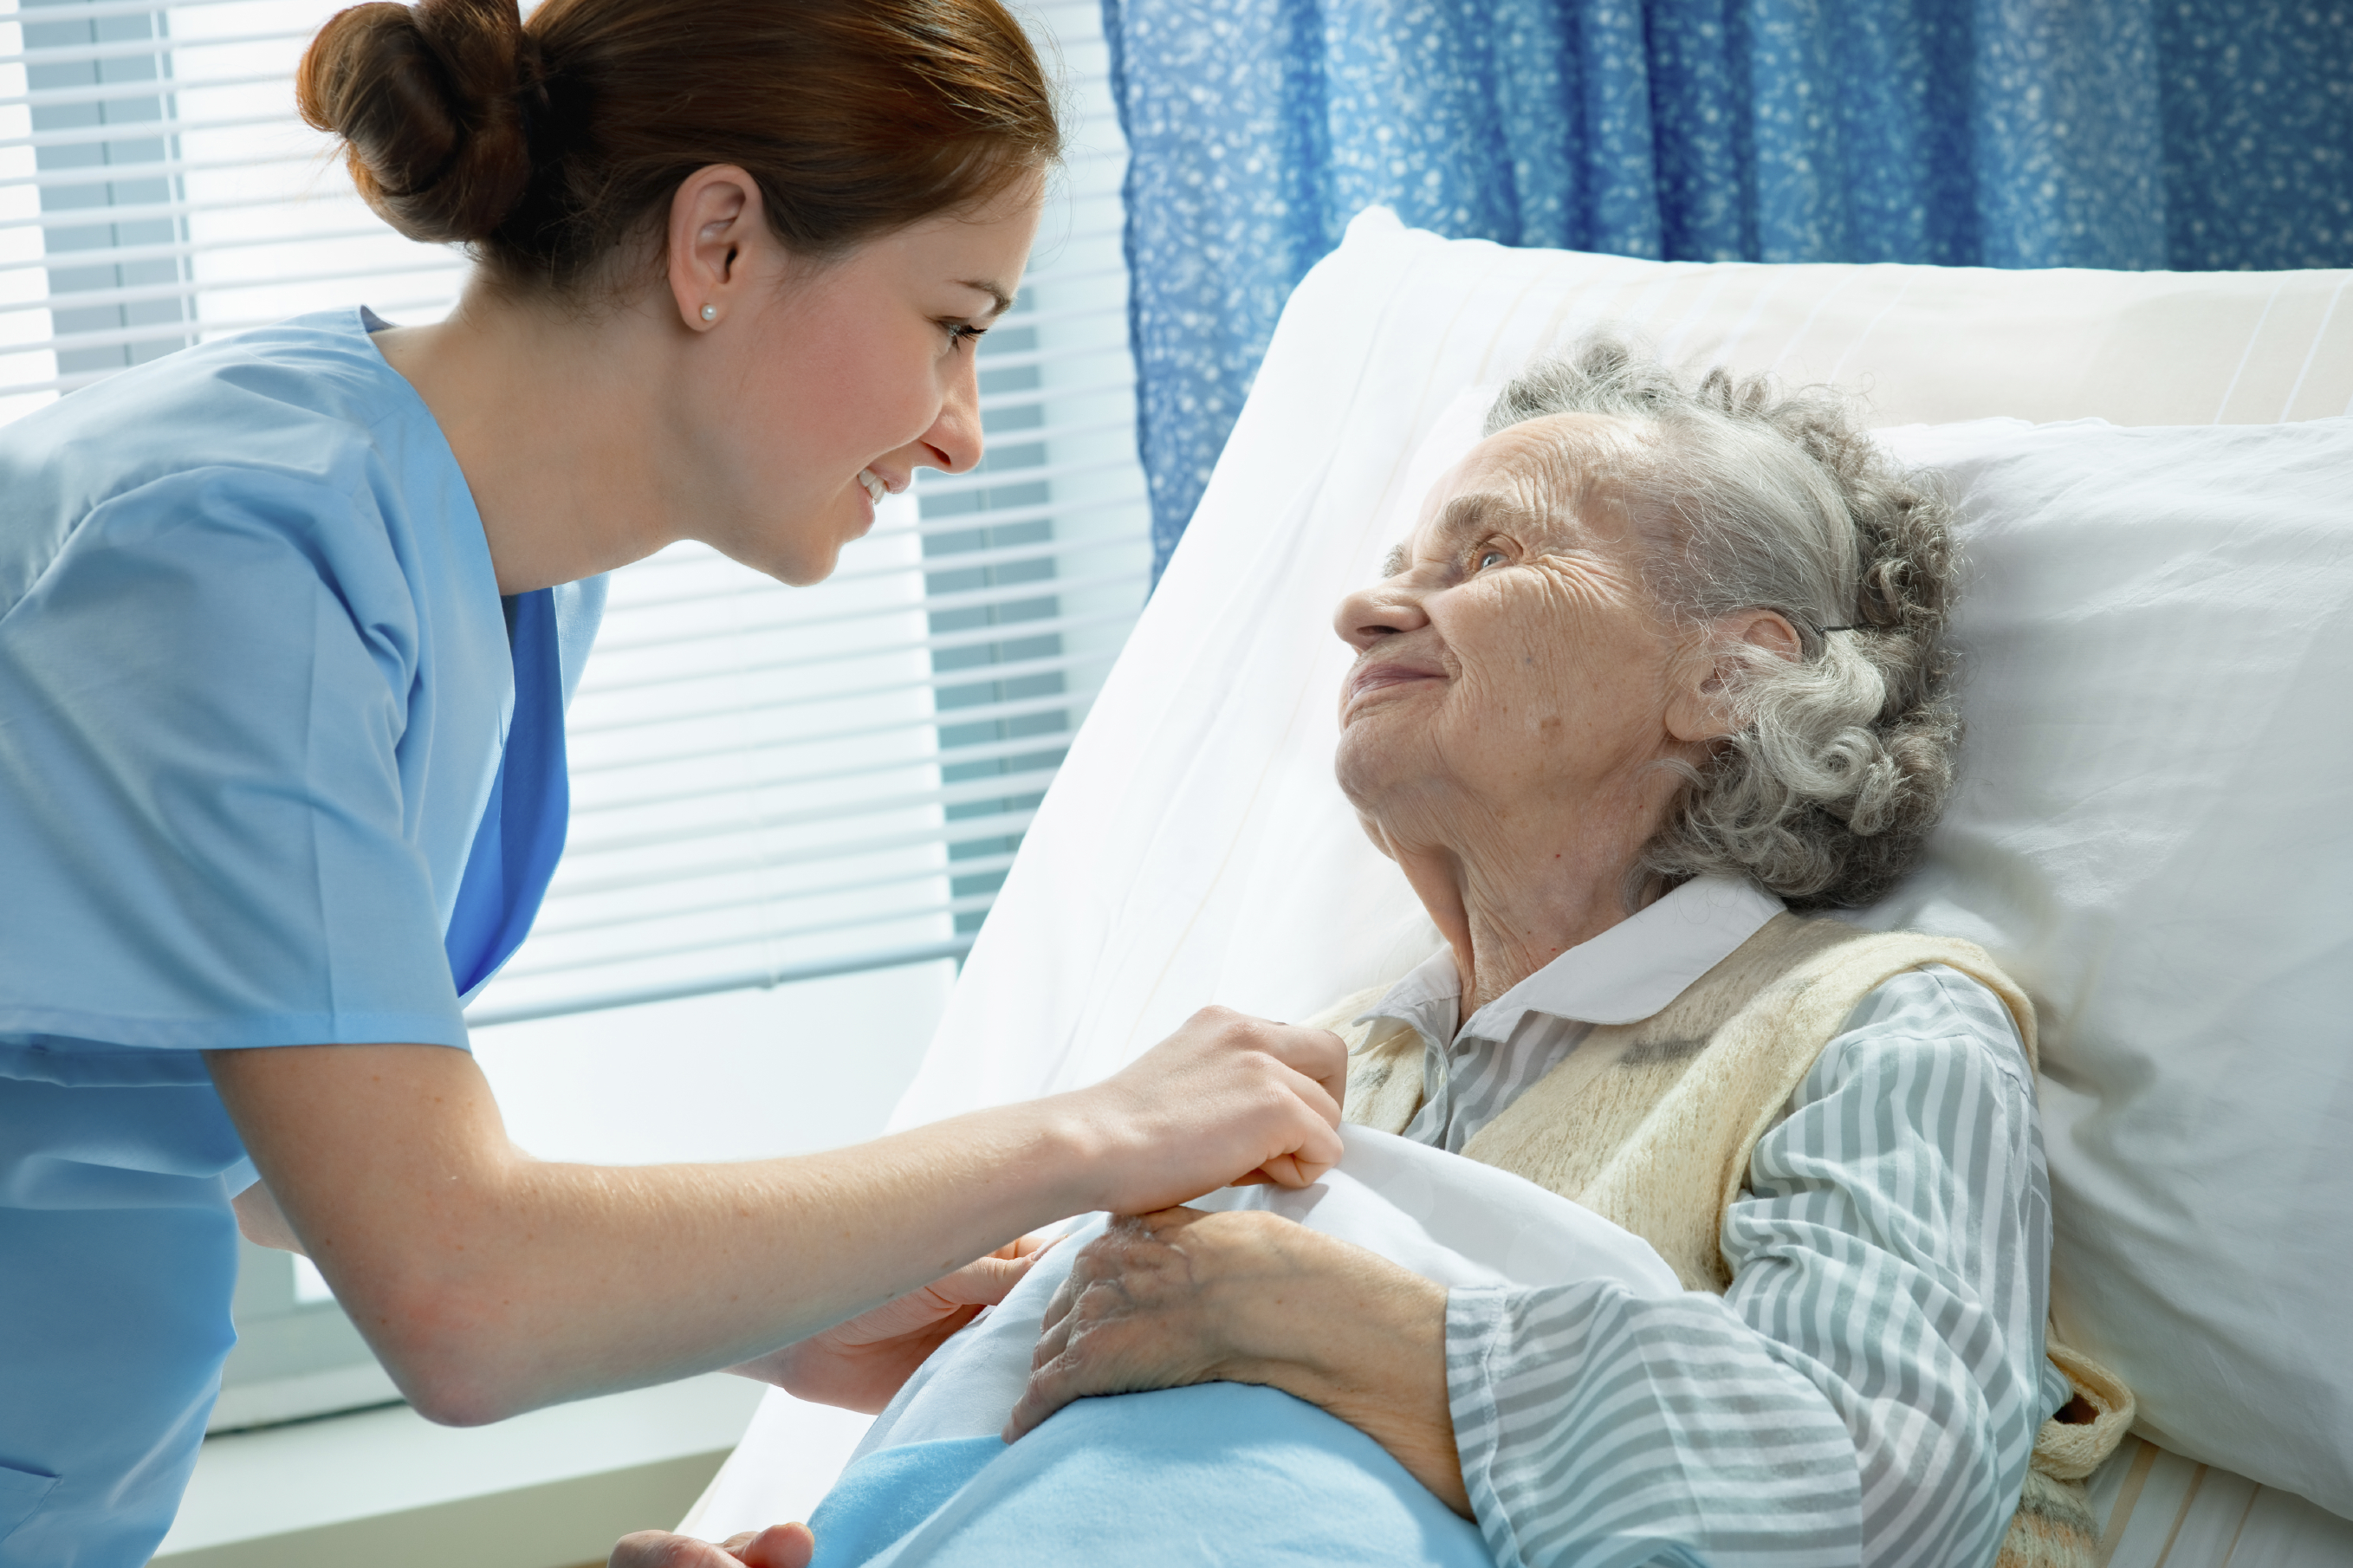 Nurse smiling at an elderly patient in a hospital bed.